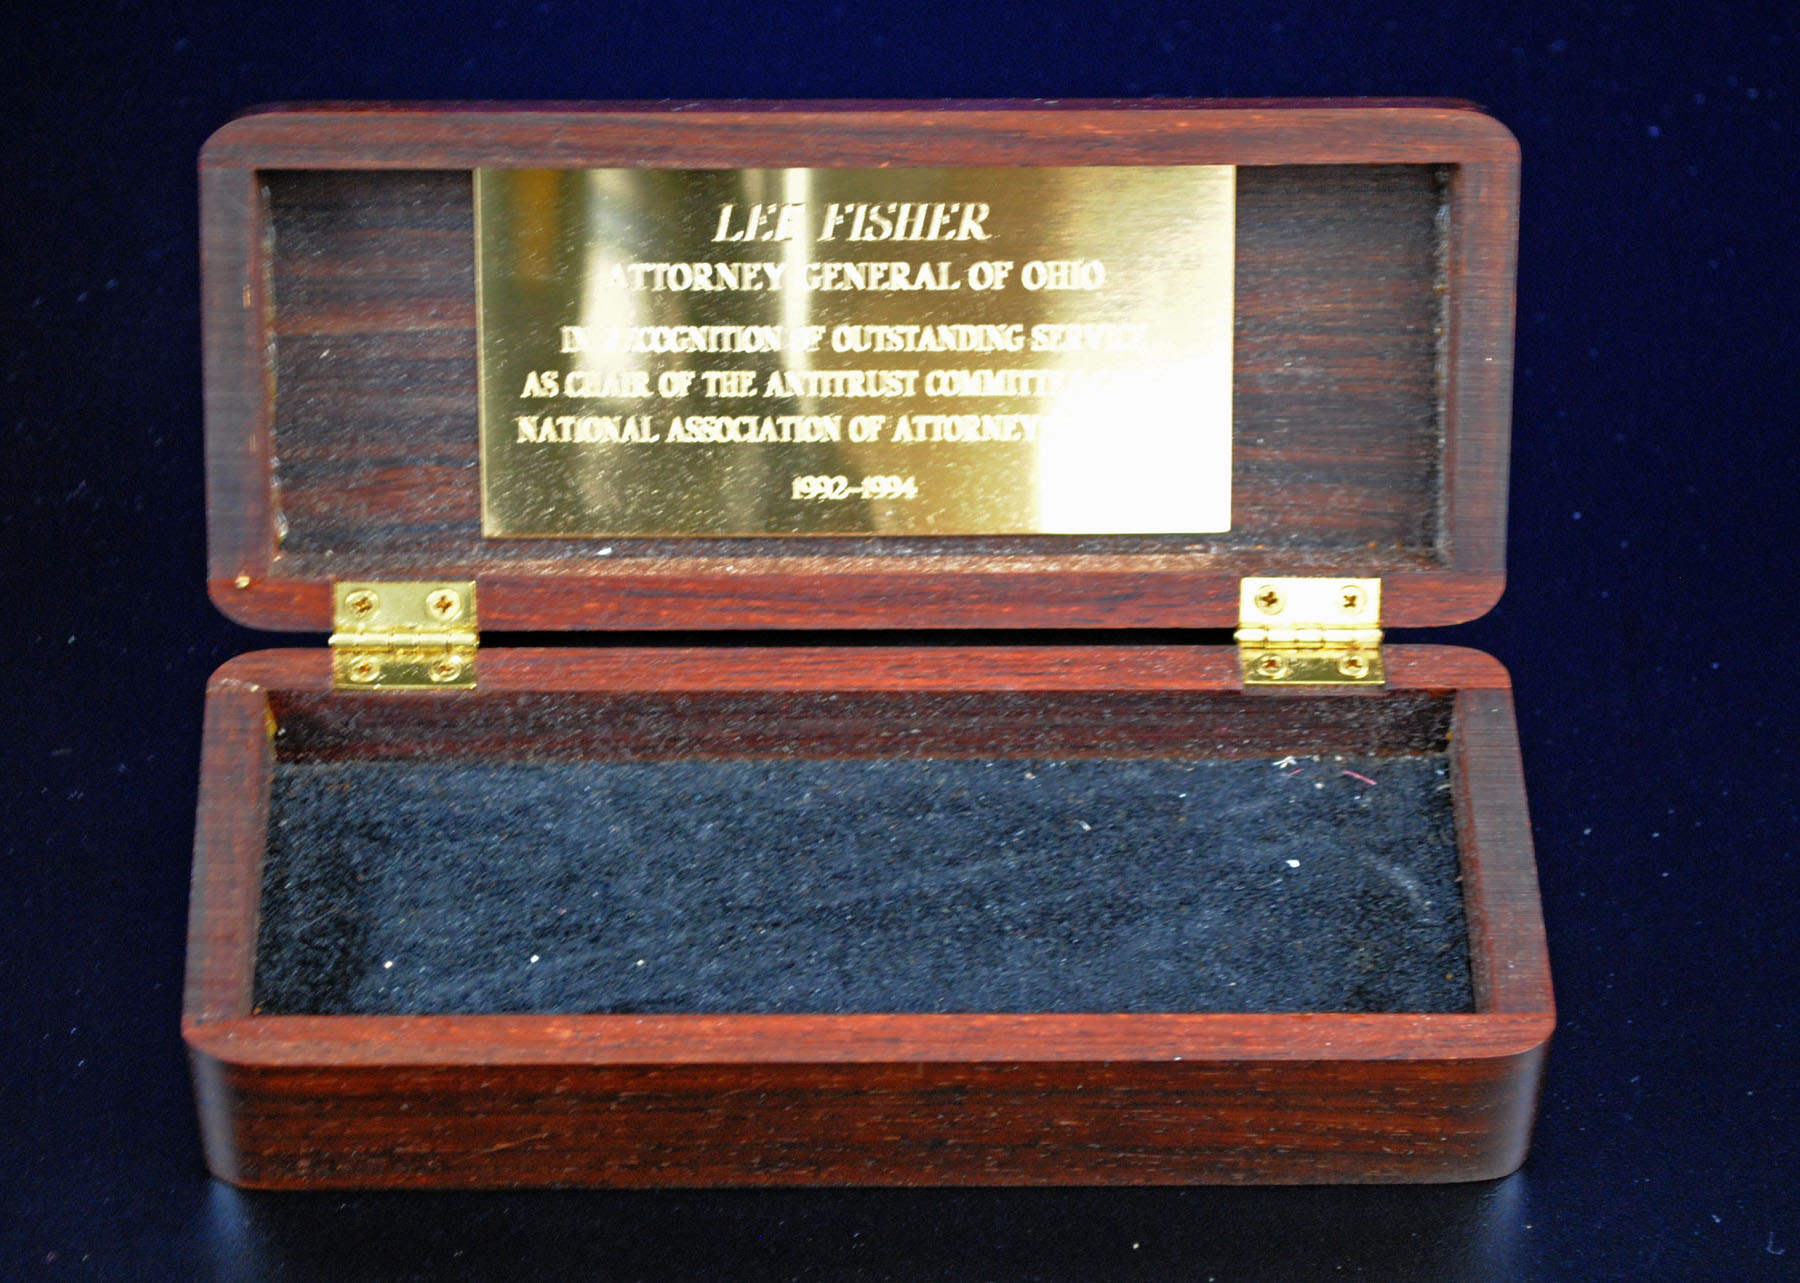 Pen Case Awarded to Attorney General Lee Fisher by the National Association of Attorneys General 